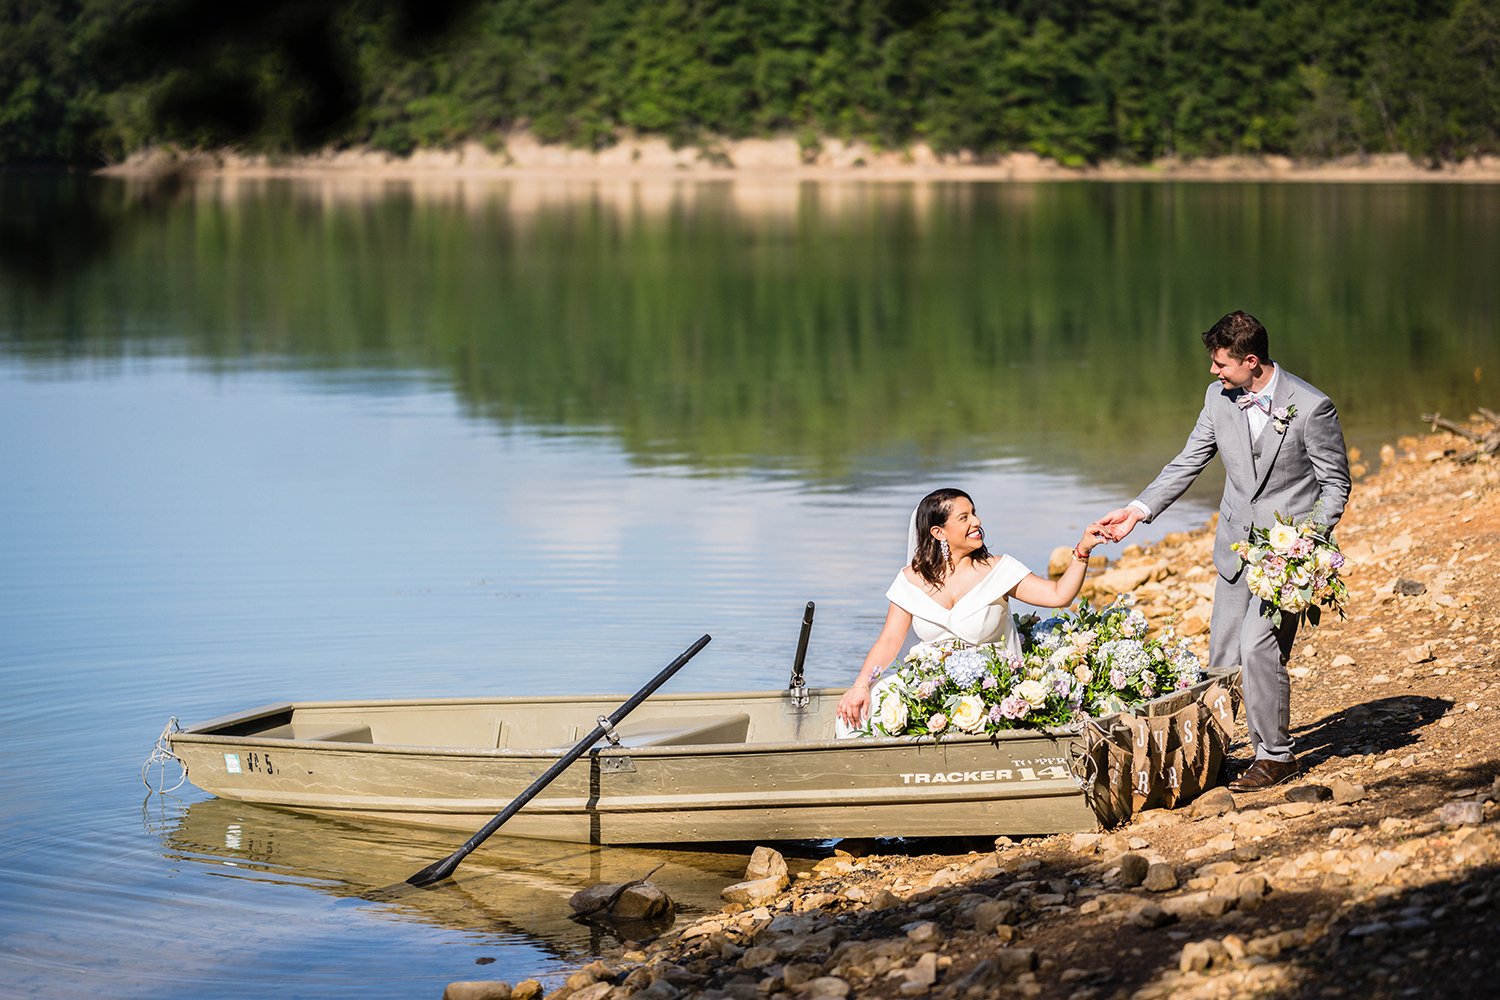 A groom helps his bride into a rowboat adorned with flowers and with a banner that says "just married" while holding a bouquet of flowers on their elopement day at Carvin's Cove.